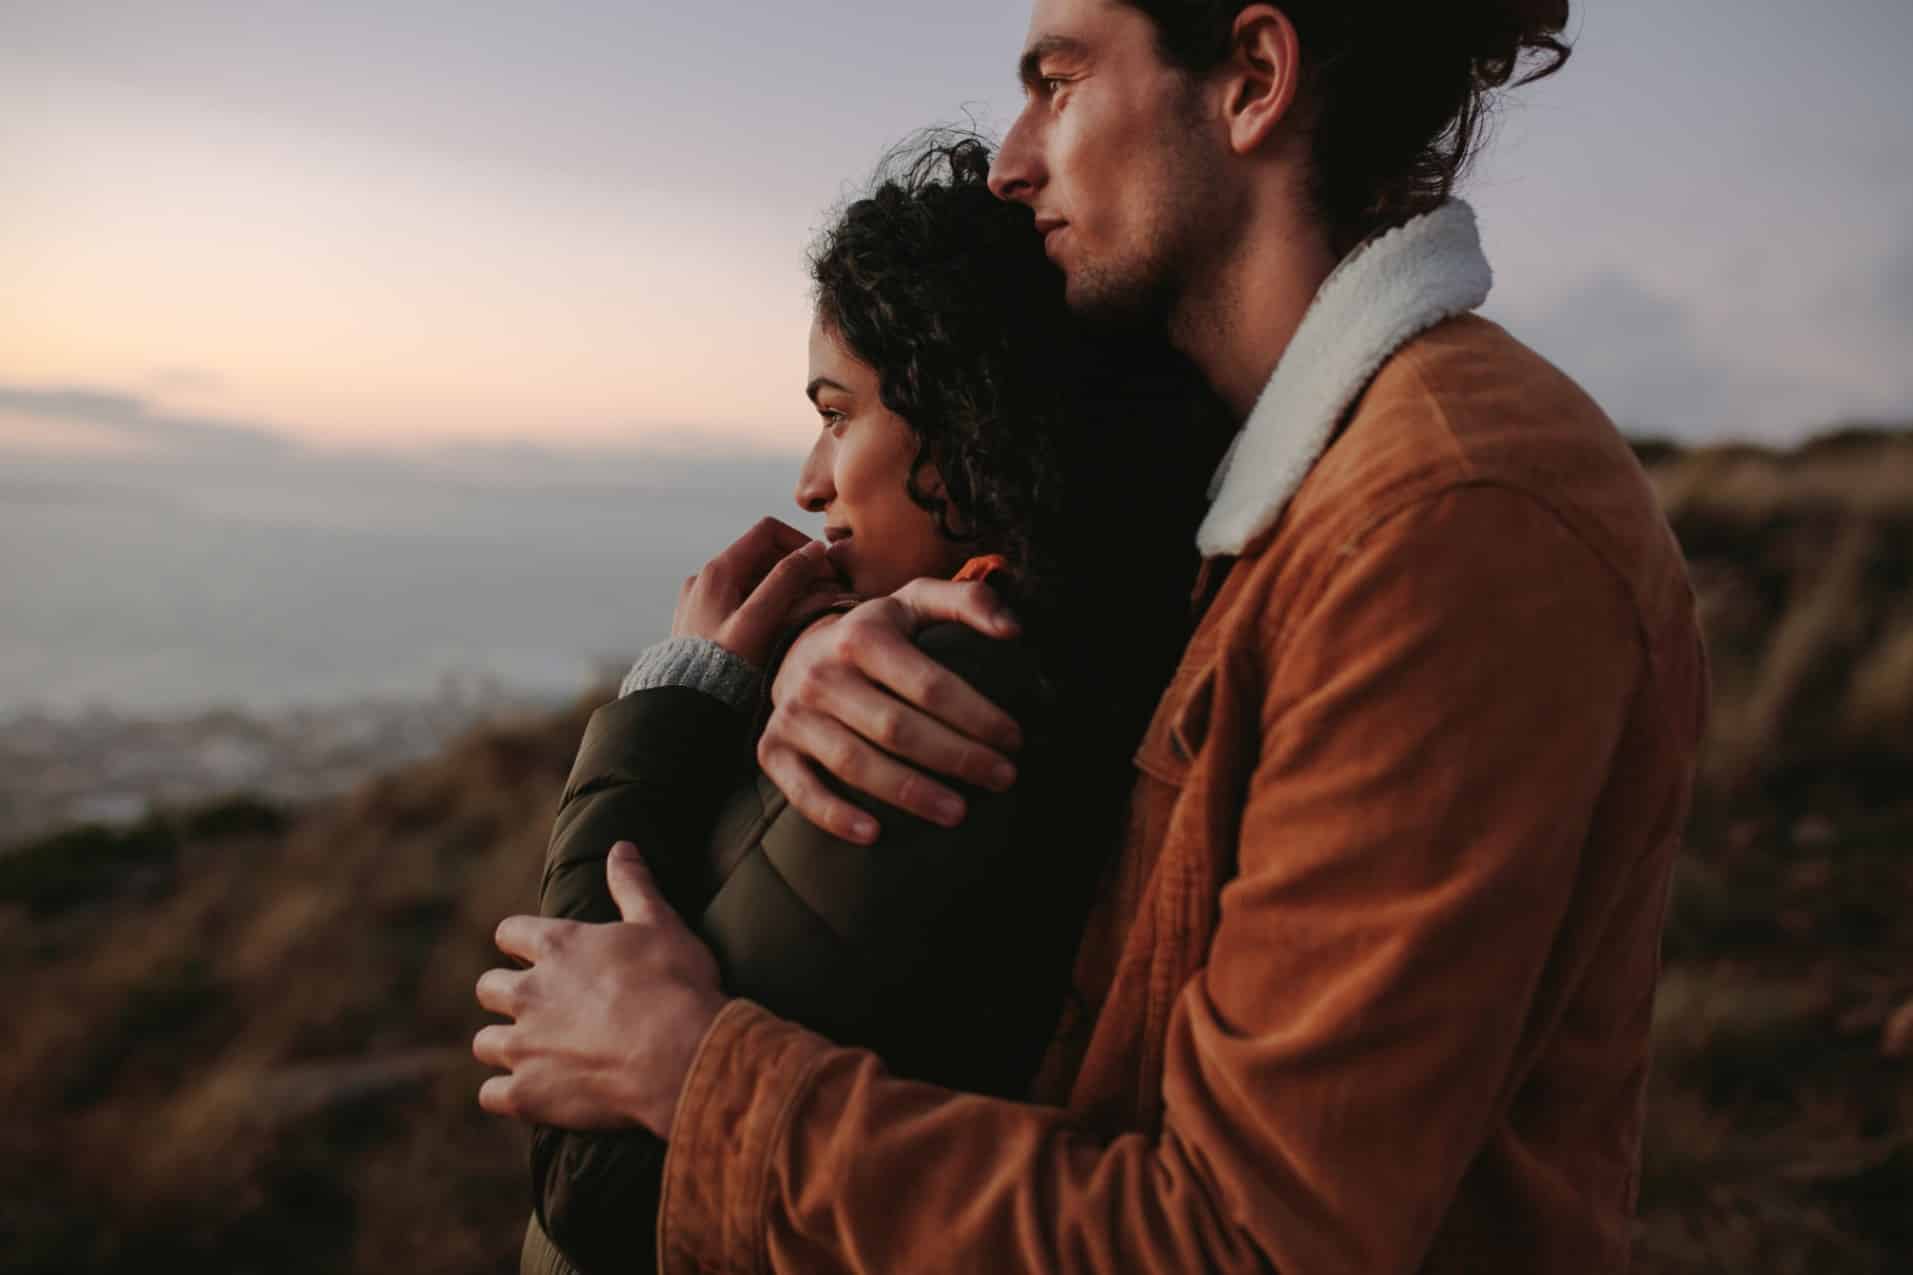 Tips for Building a Healthy Relationship - HelpGuide.org